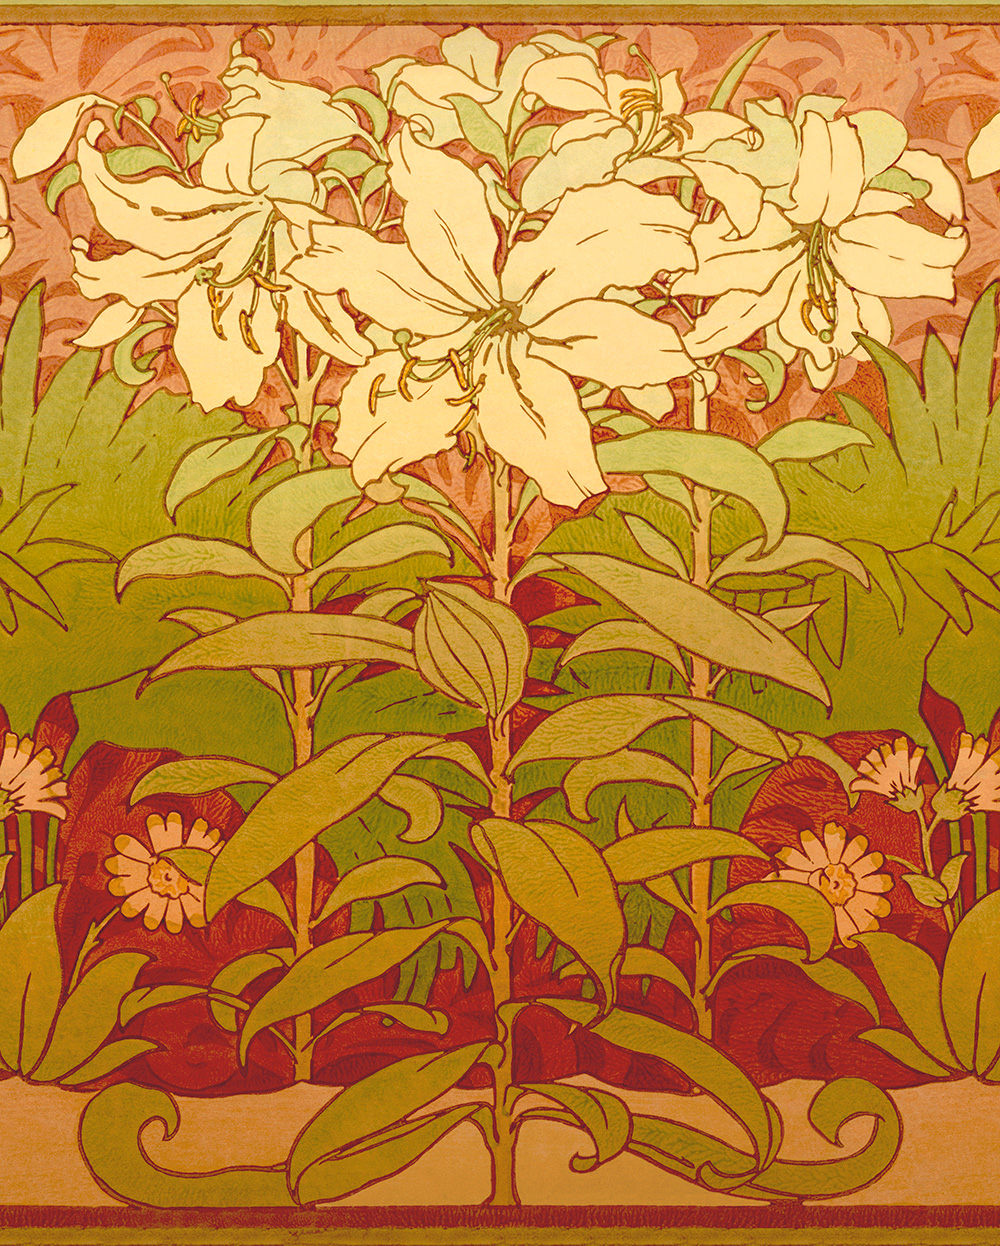 Lilies of the Field Art Poster, click to enlarge